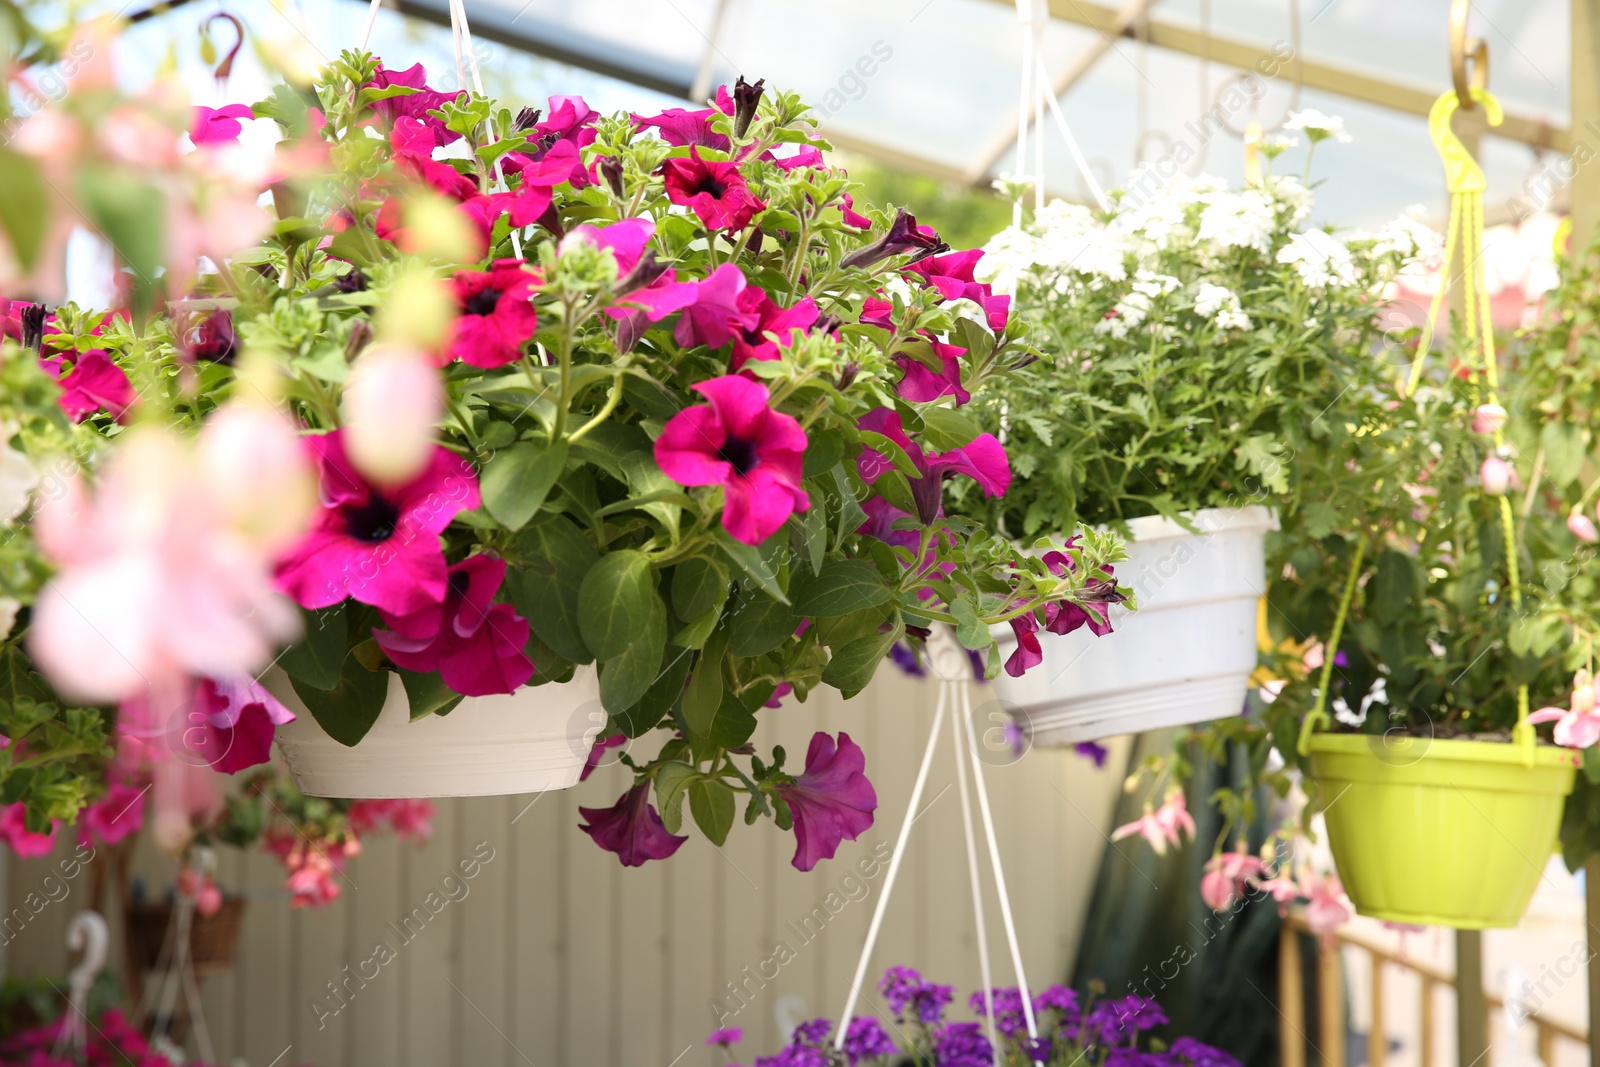 Photo of Different beautiful flowers in plant pots hanging outdoors